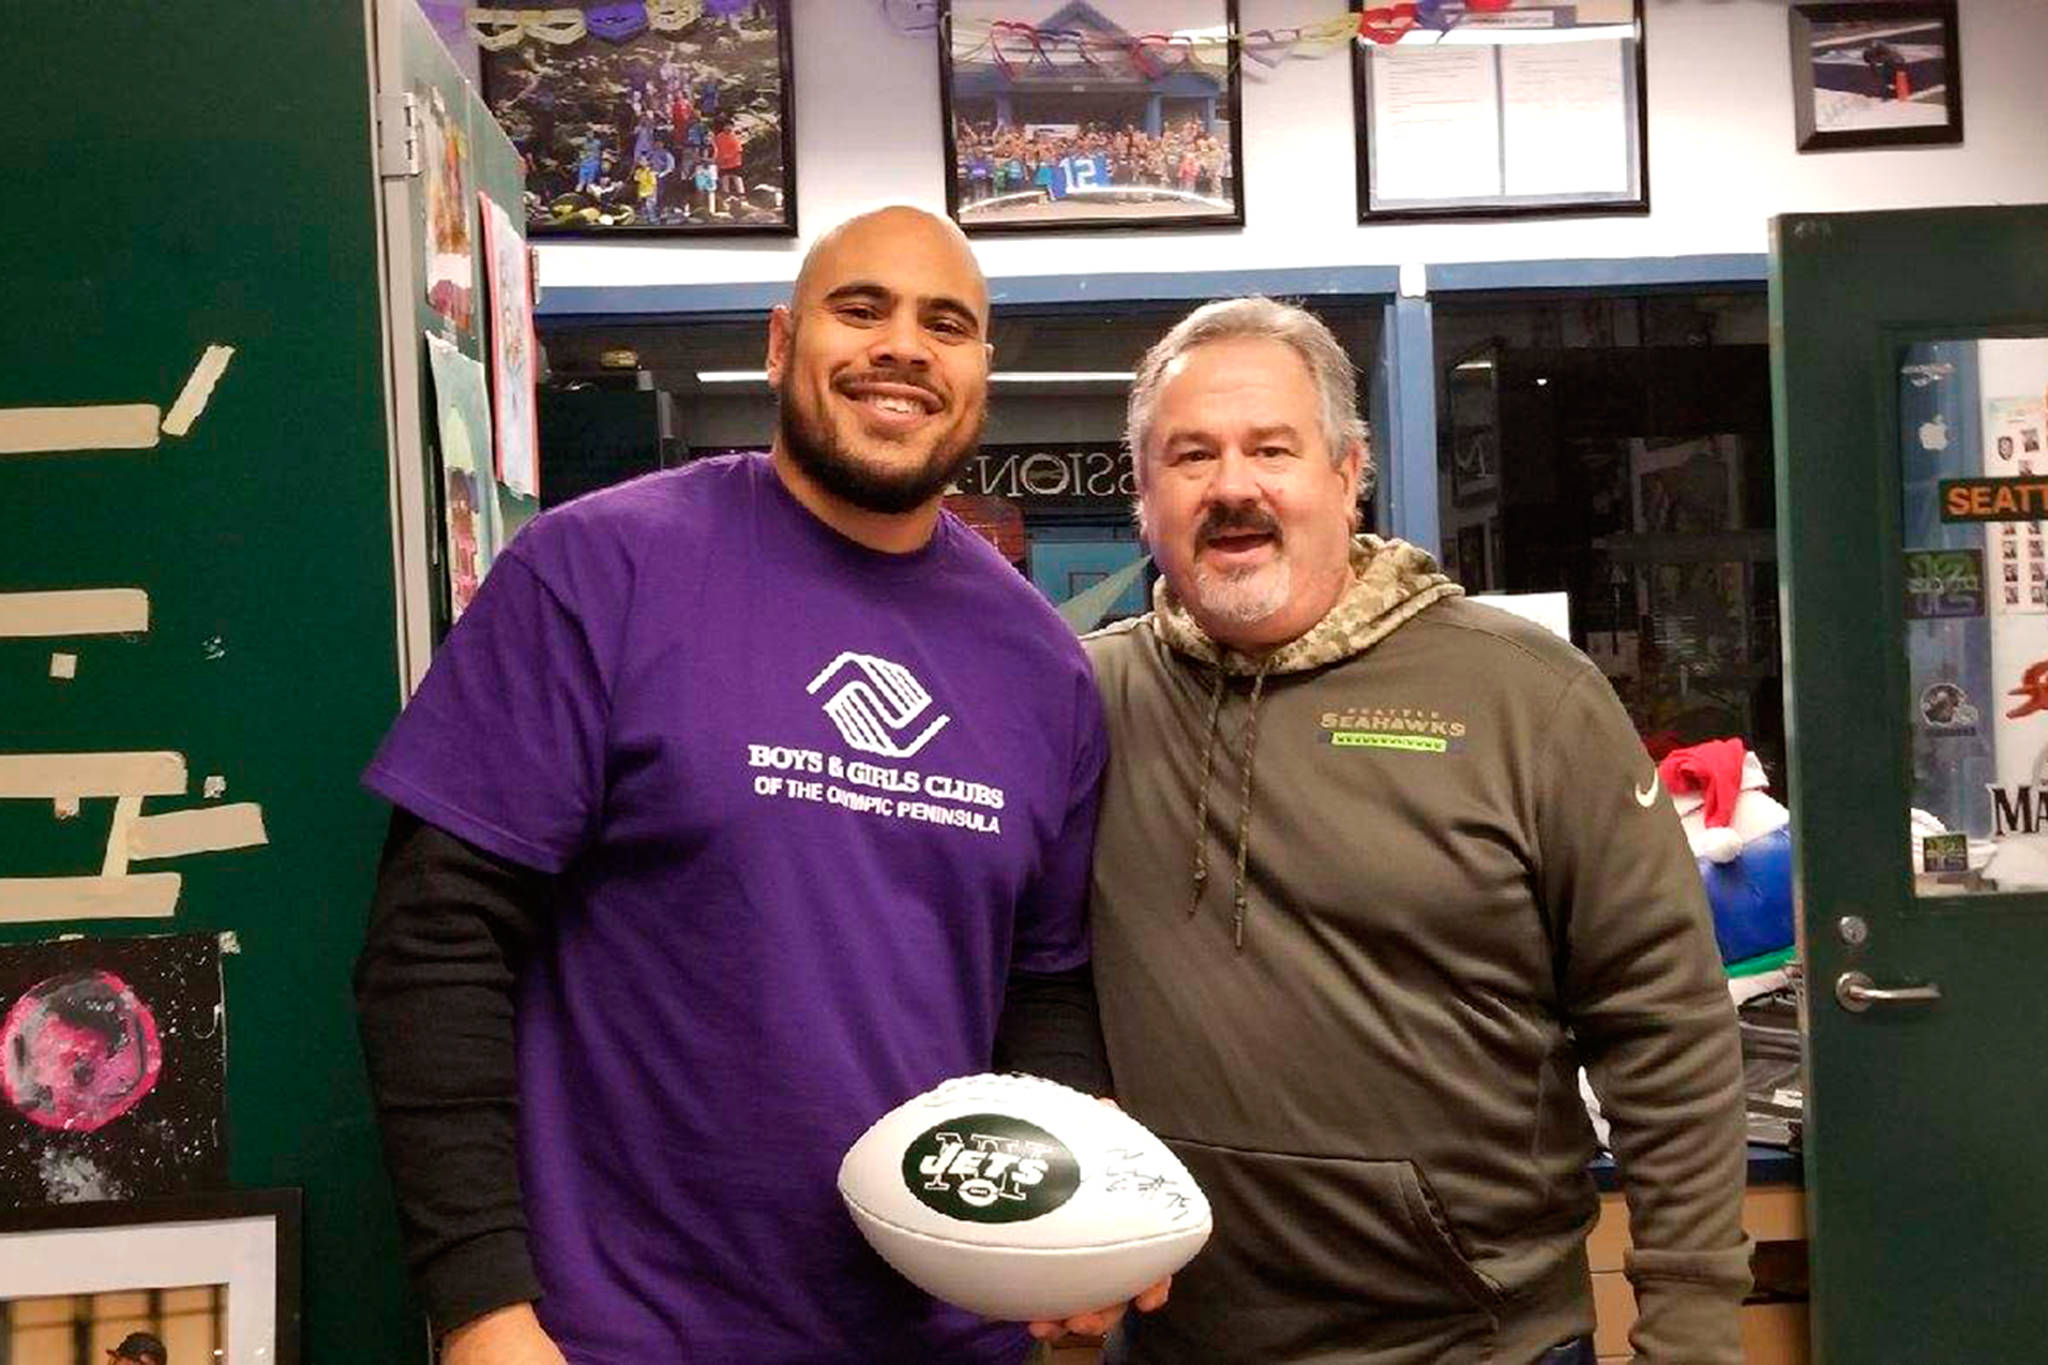 New York Jets’ defensive end Xavier Cooper stands with Dave Miller, Sequim Boys & Girls Club unit director, on Feb. 16, while visiting with club members about anti-bullying campaign. Photo courtesy of the Boys & Girls Club of the Olympic Peninsula